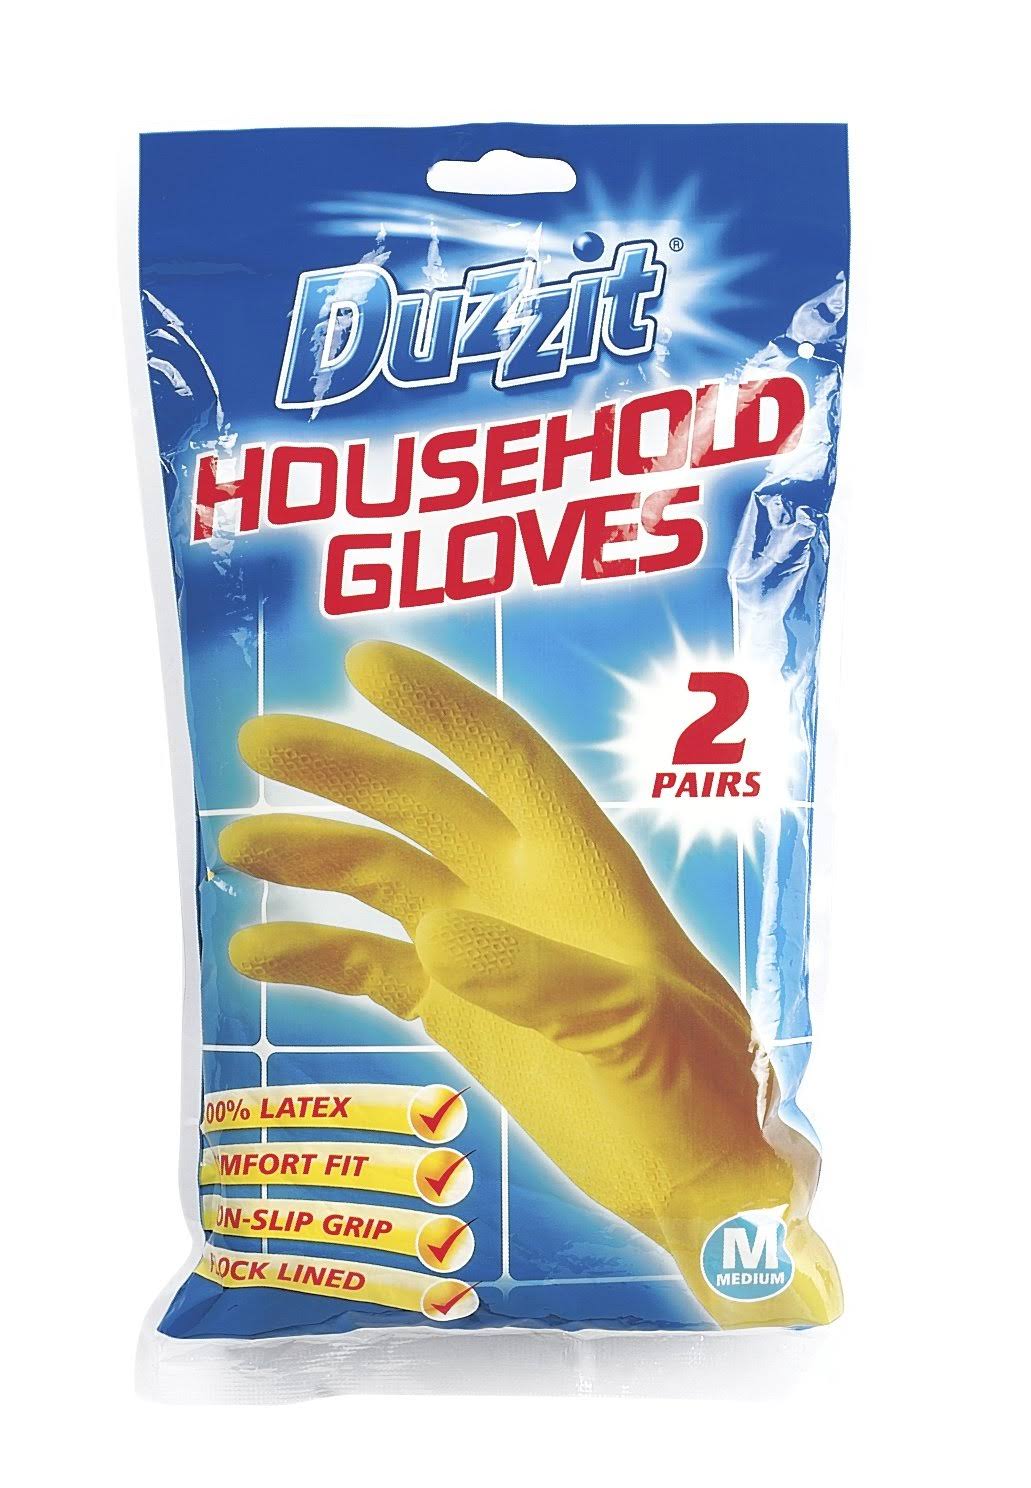 Duzzit Household Gloves 2 Pack Small